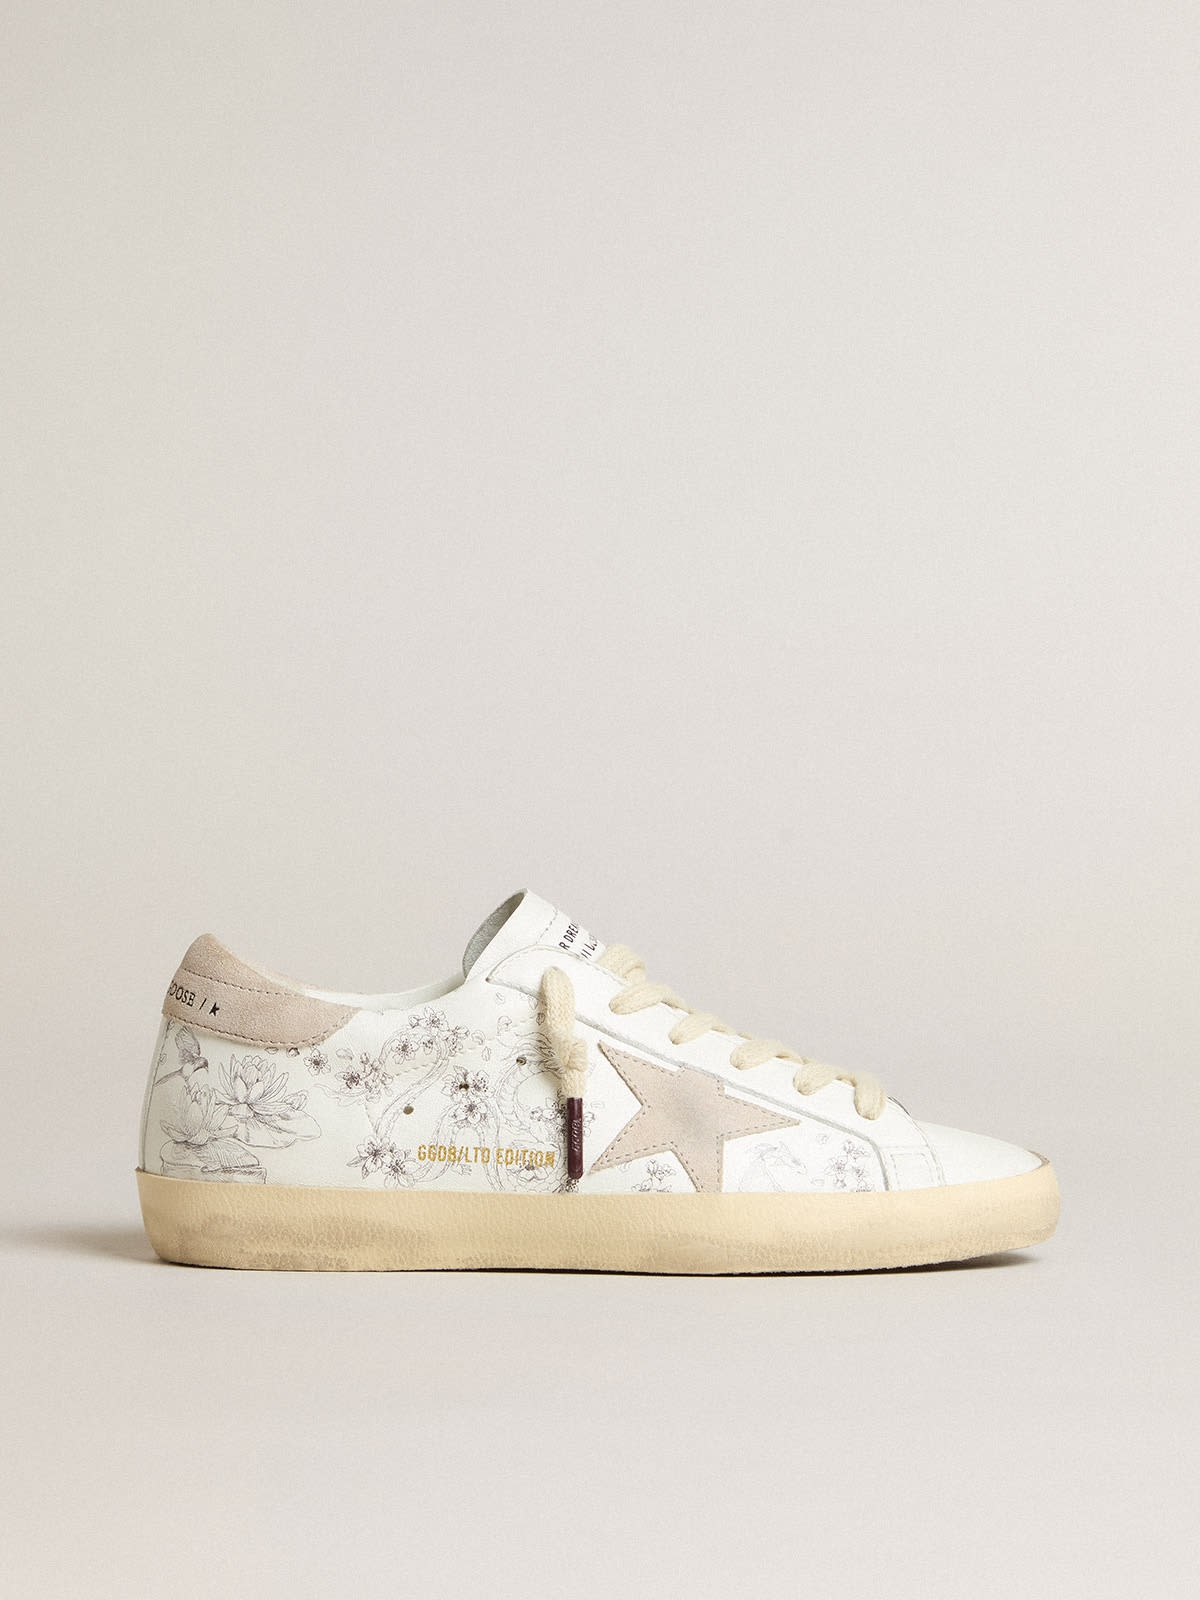 Women’s Super-Star LTD CNY in white leather with lettering on the upper - 1